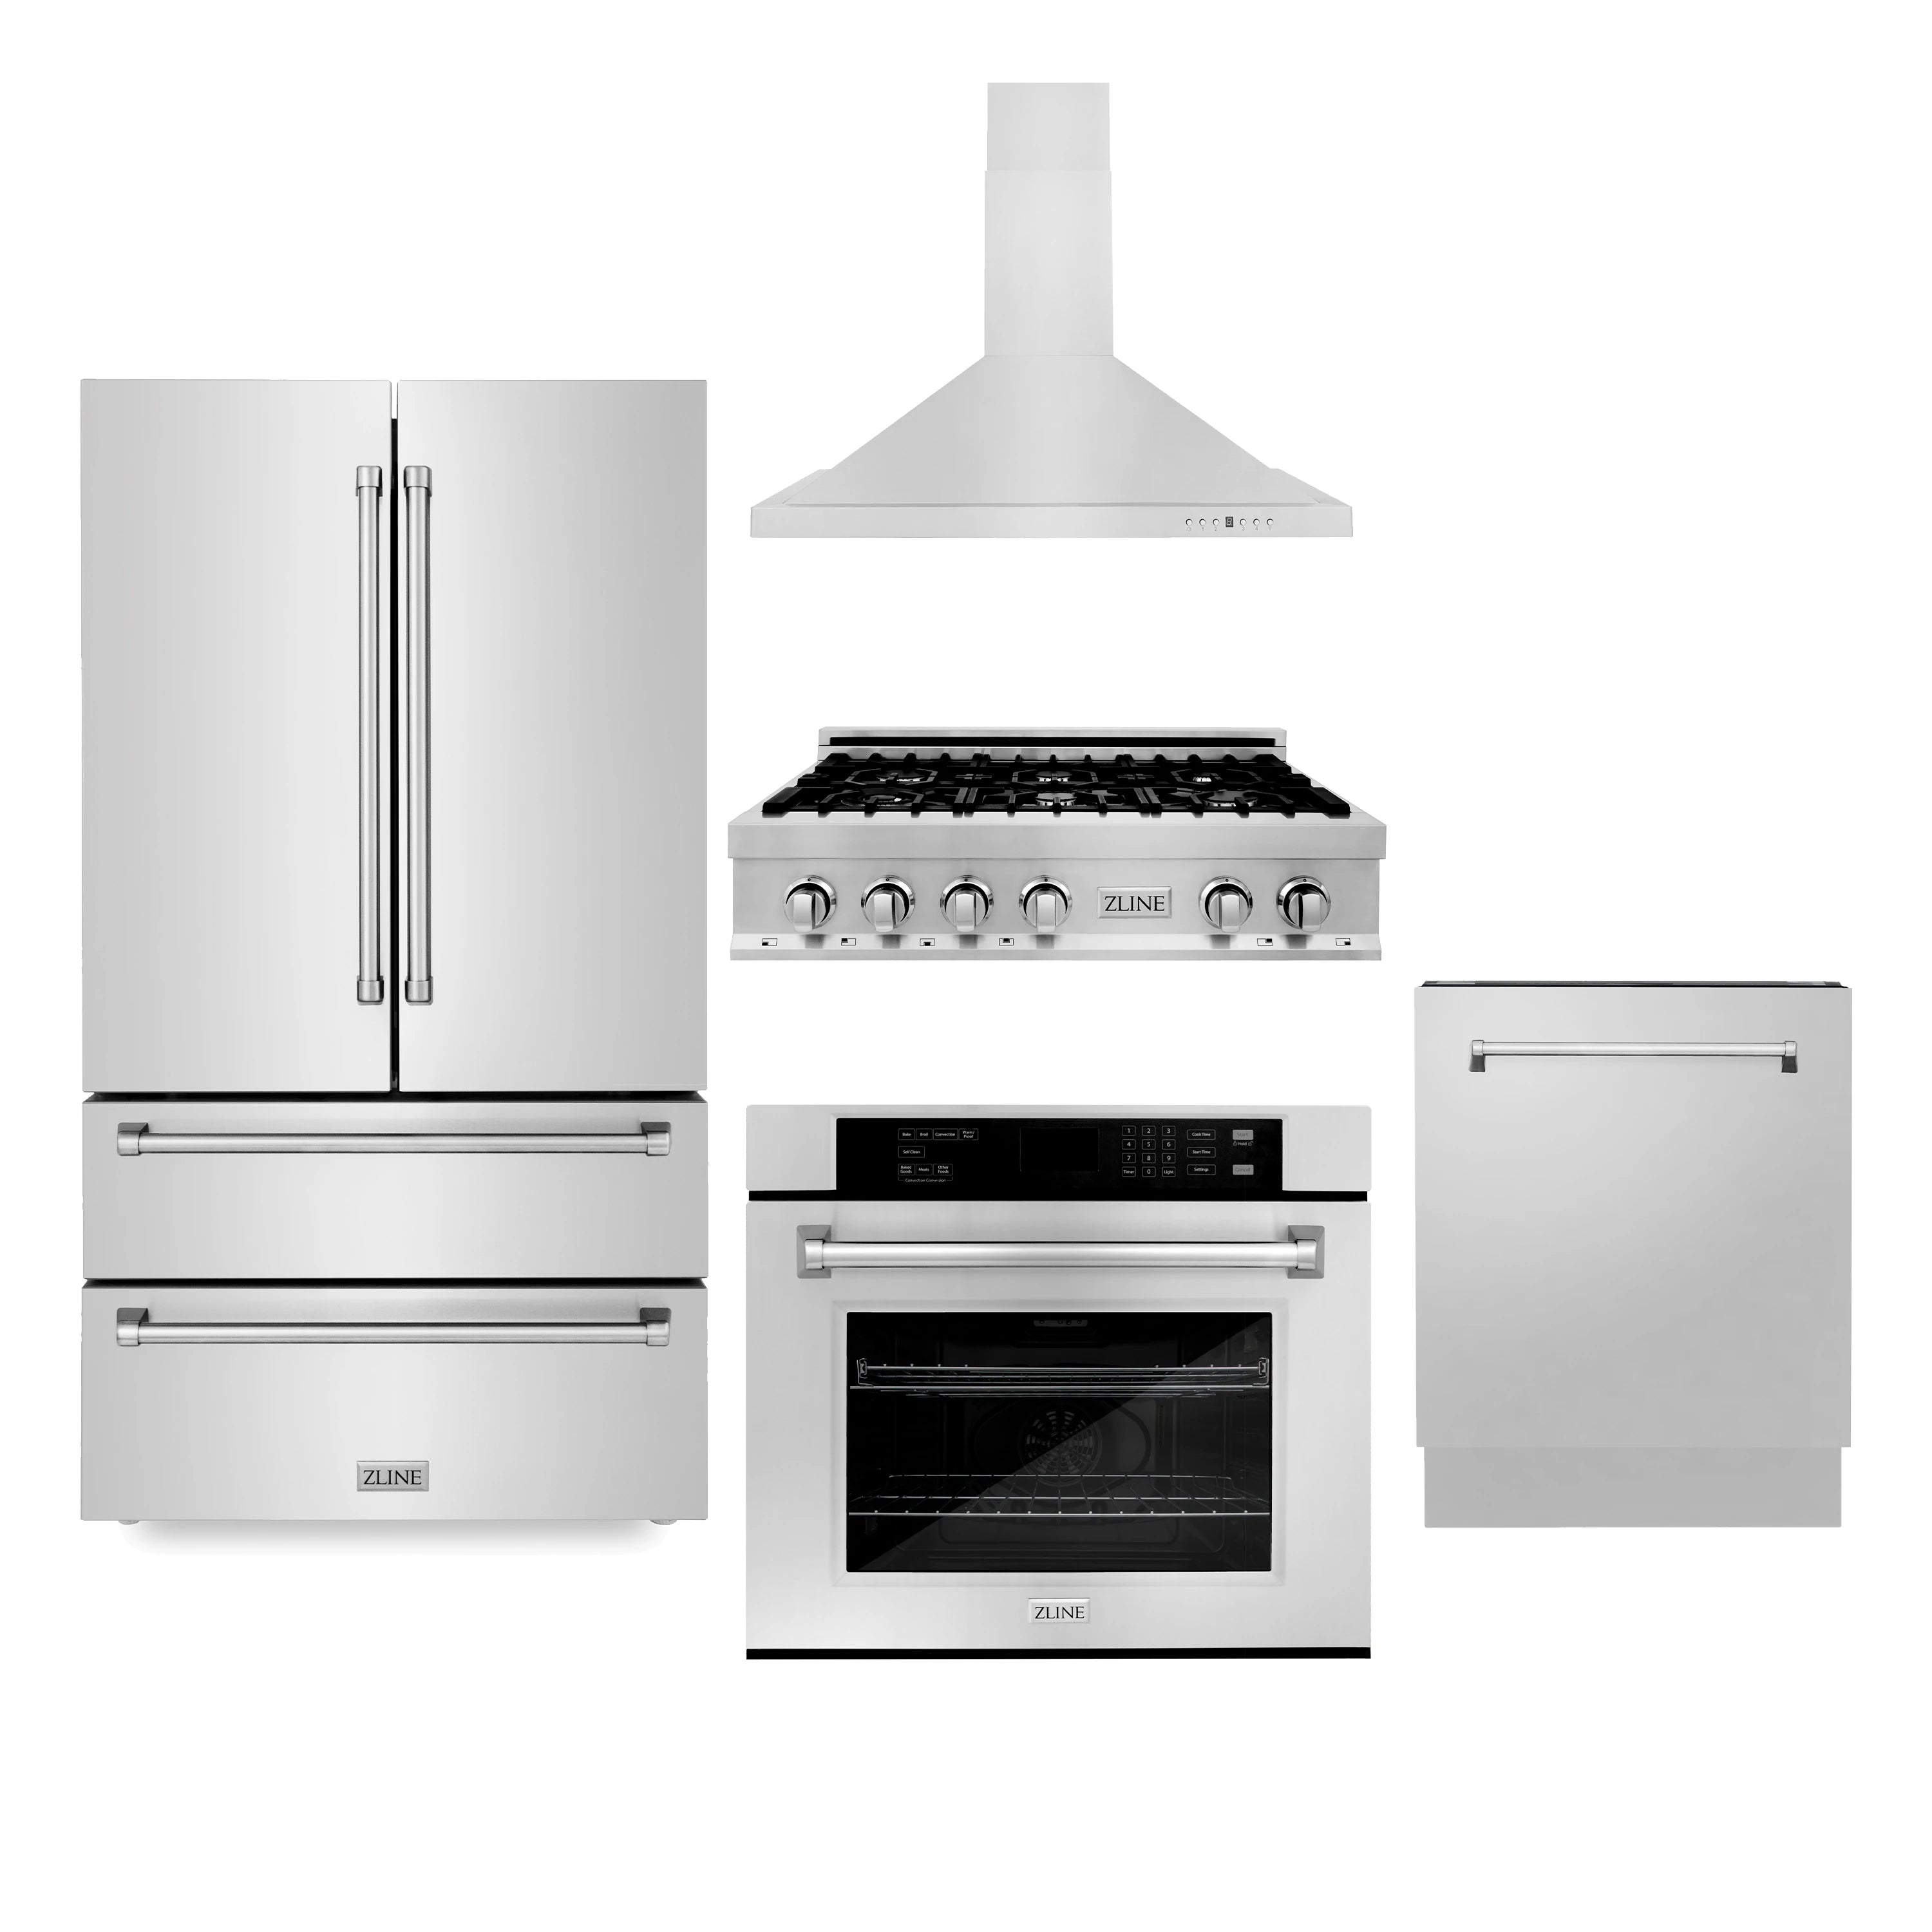 ZLINE 5-Piece Appliance Package - 36-Inch Rangetop, Refrigerator, 30-Inch Electric Wall Oven, 3-Rack Dishwasher, and Convertible Wall Mount Hood in Stainless Steel (5KPR-RTRH36-AWSDWV)